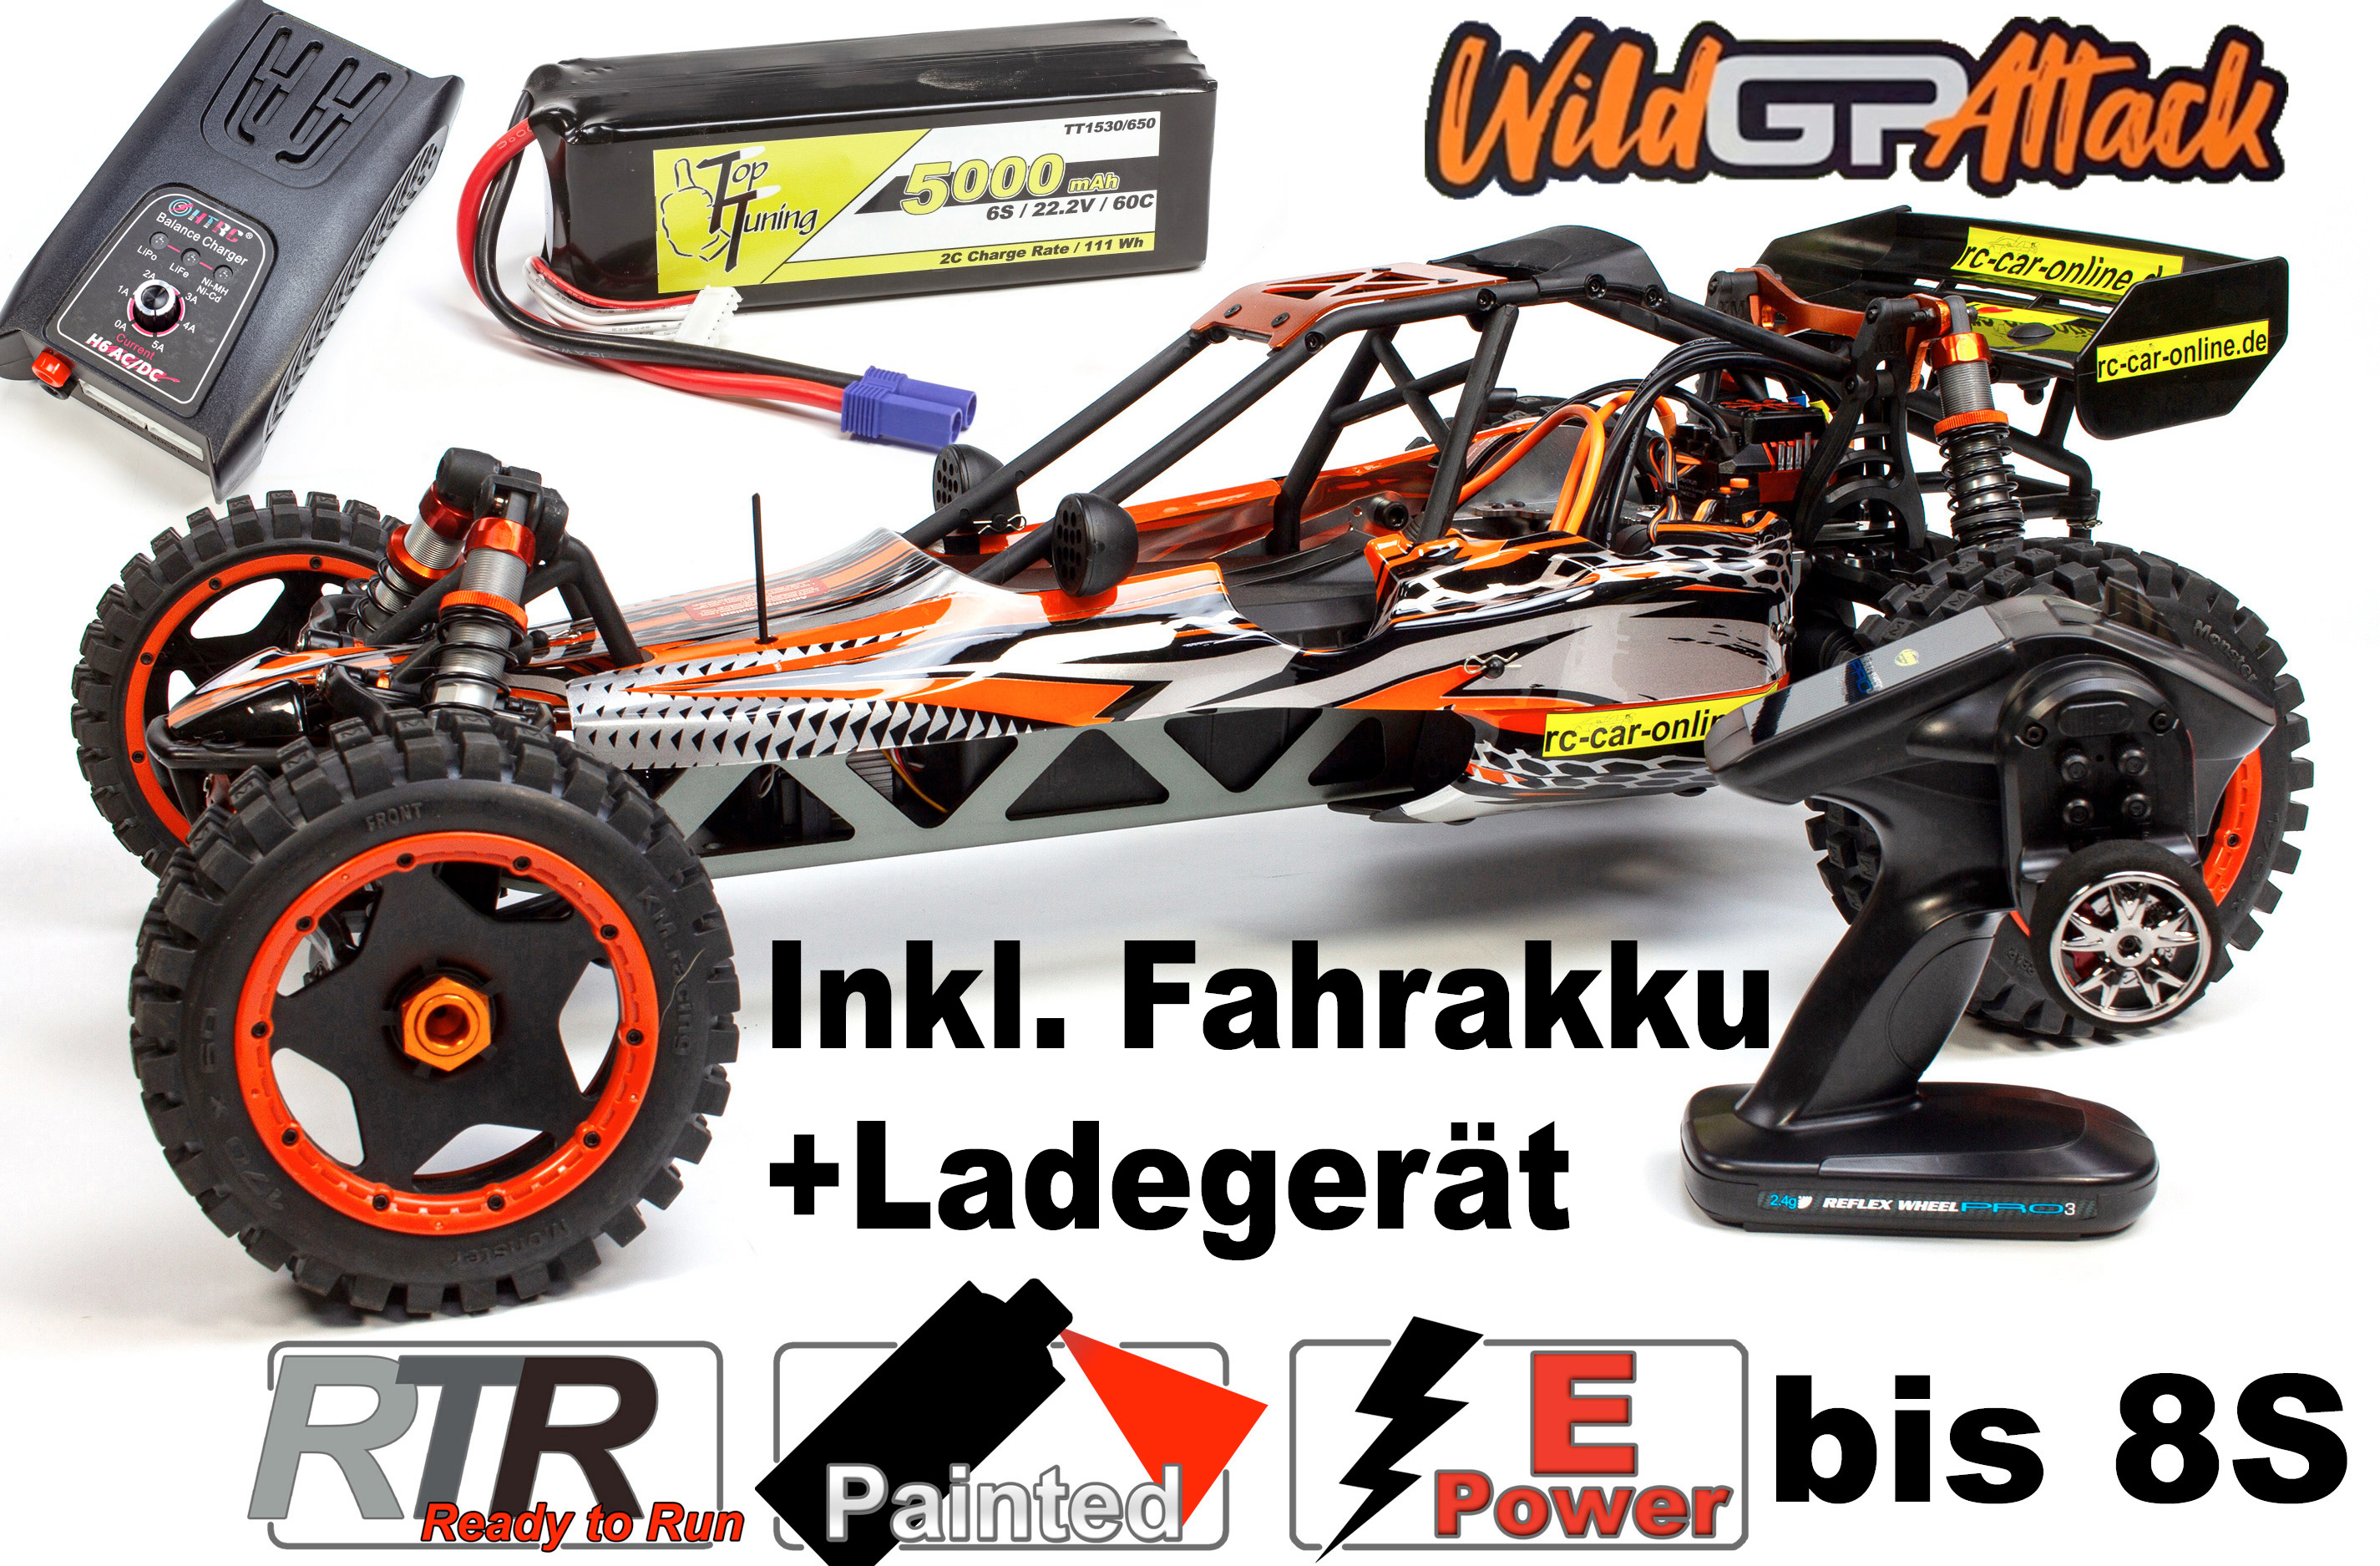 500304032/E 1:5 Wild GP Attack Brushless RTR Set with 6S driving batterie and charger